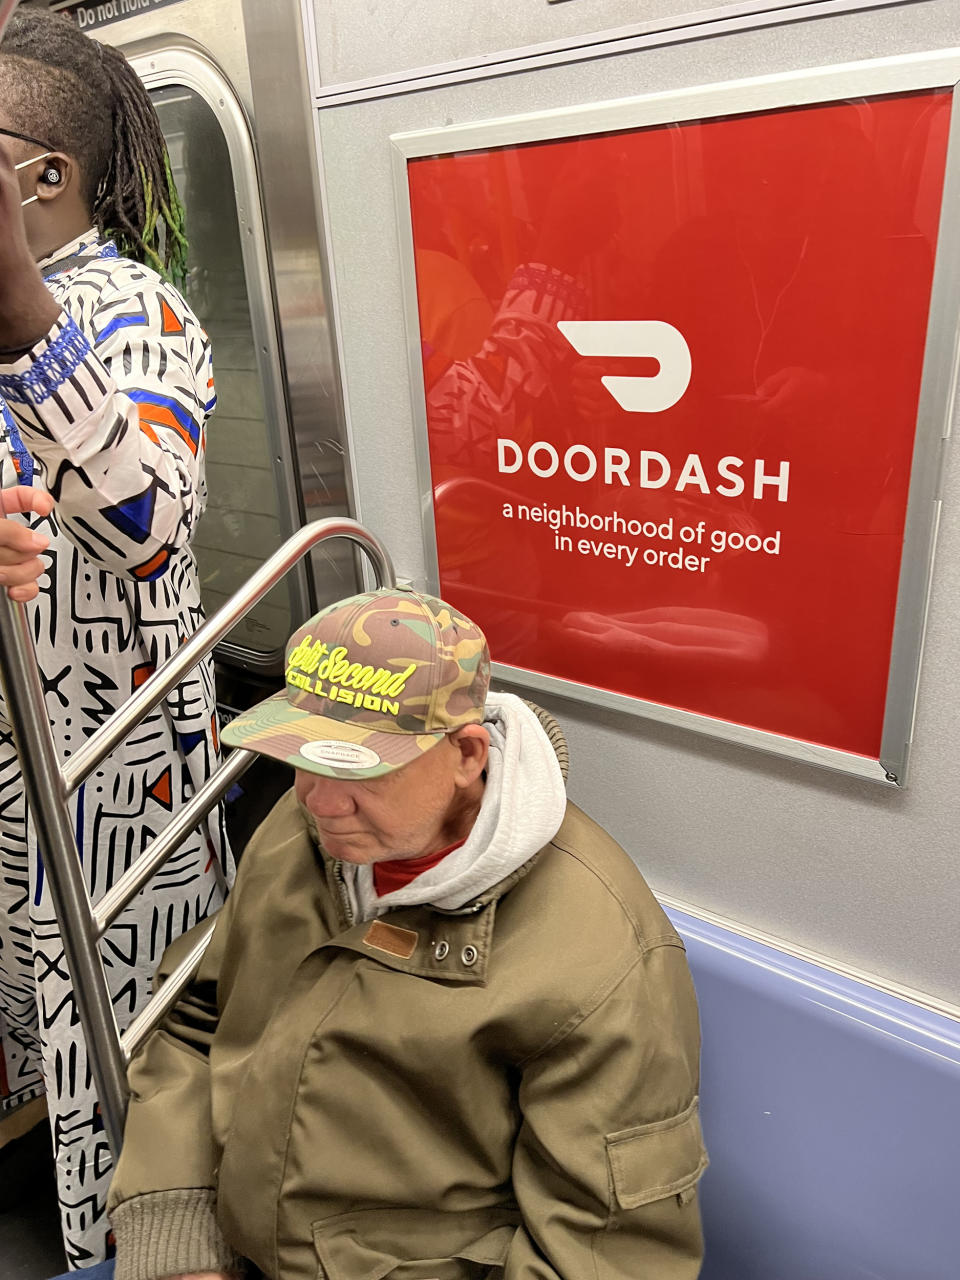 Ads for DoorDash on the New York City subway promise “a neighborhood of good in every order” — though not a neighborhood of good taste when it comes to what people wear as they dash to their own doors to accept their food. (Thomas P. Farley)